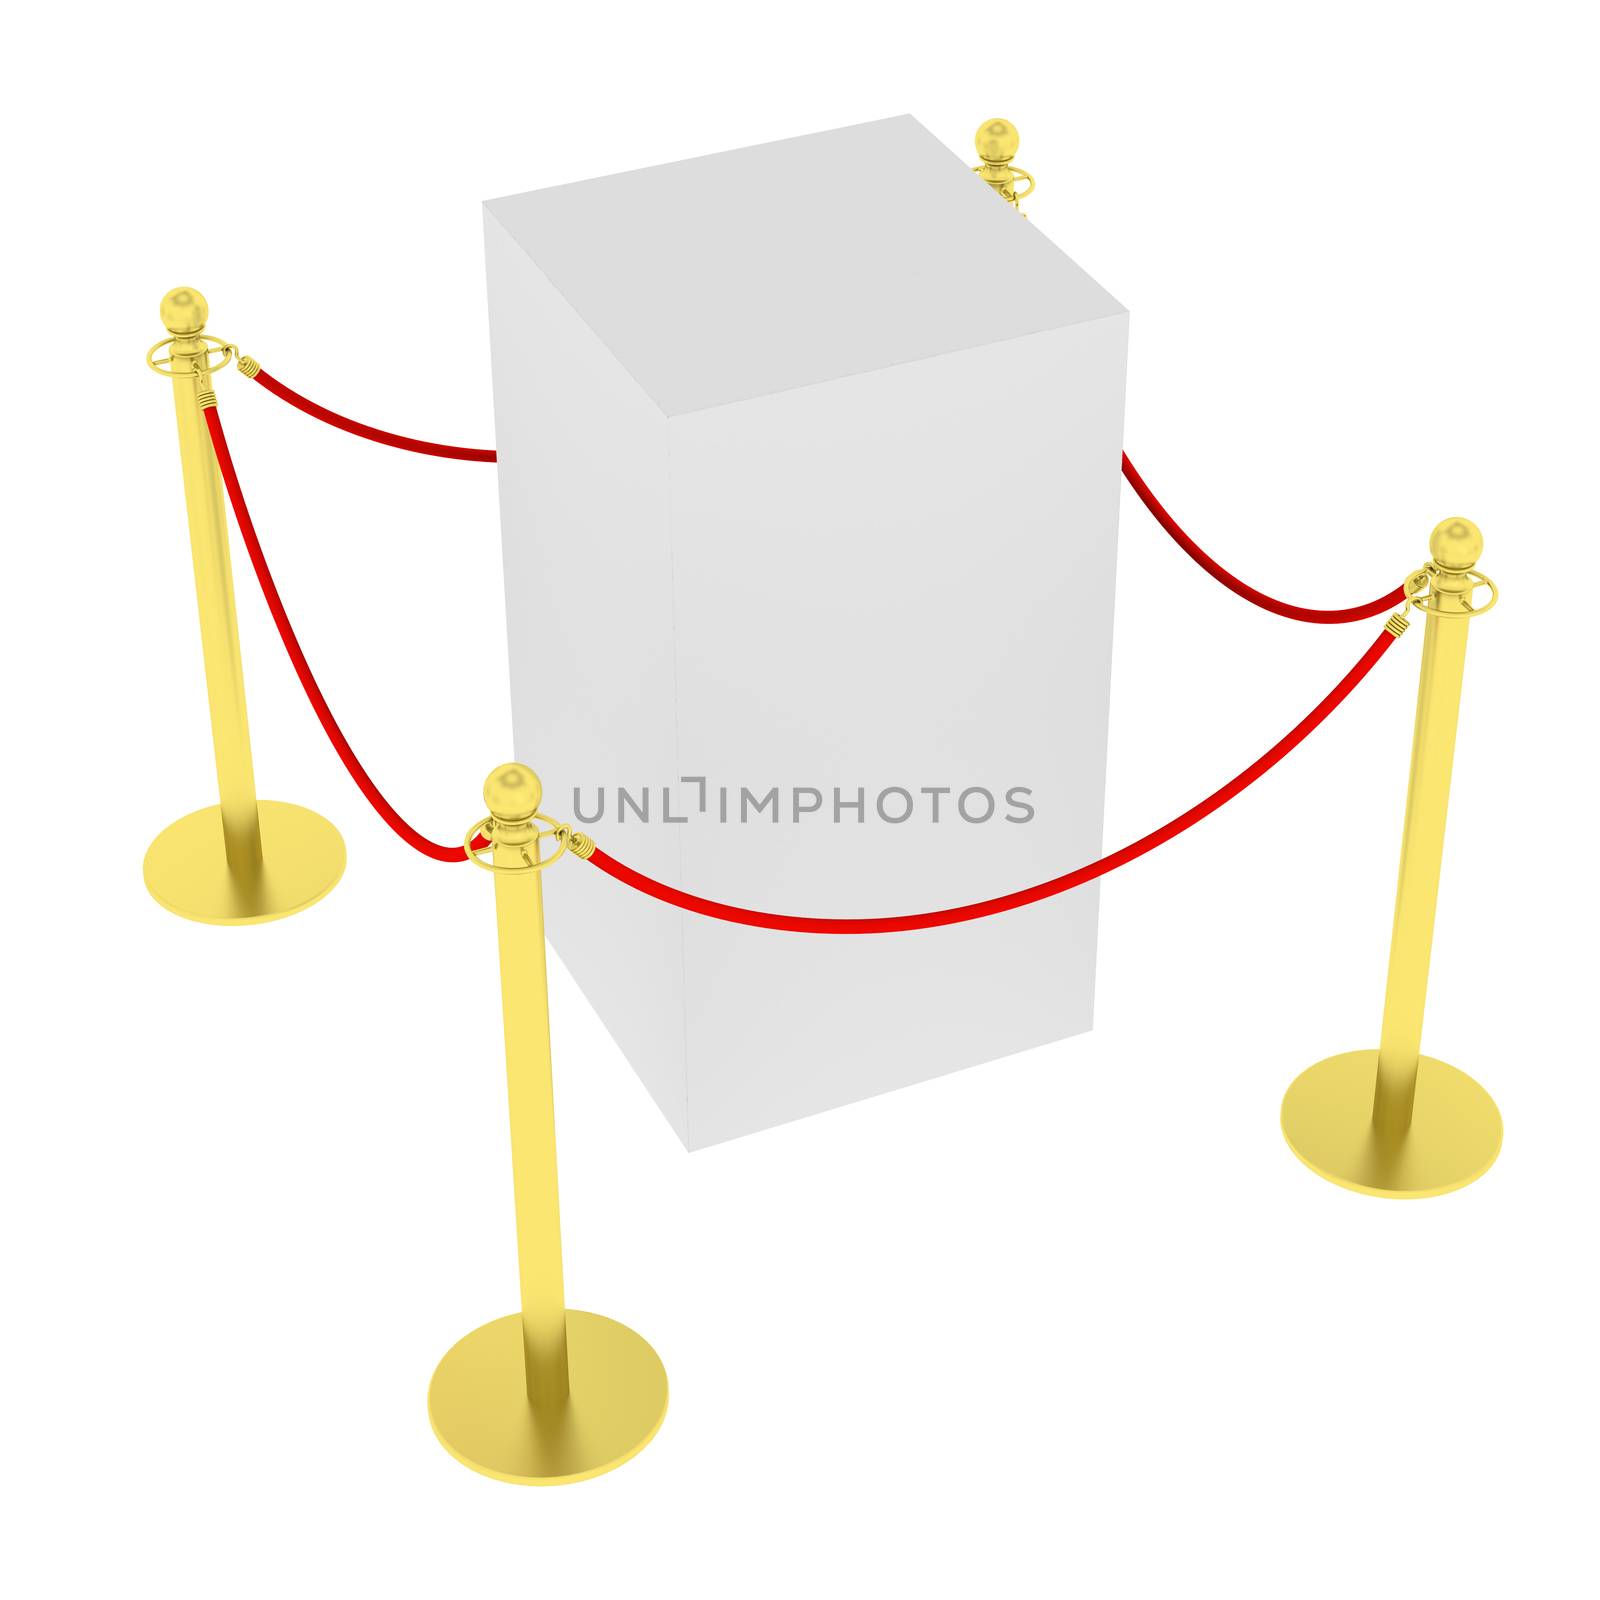 Empty showcase with tiled stand barriers for exhibit. Isolated on white background. 3D illustration